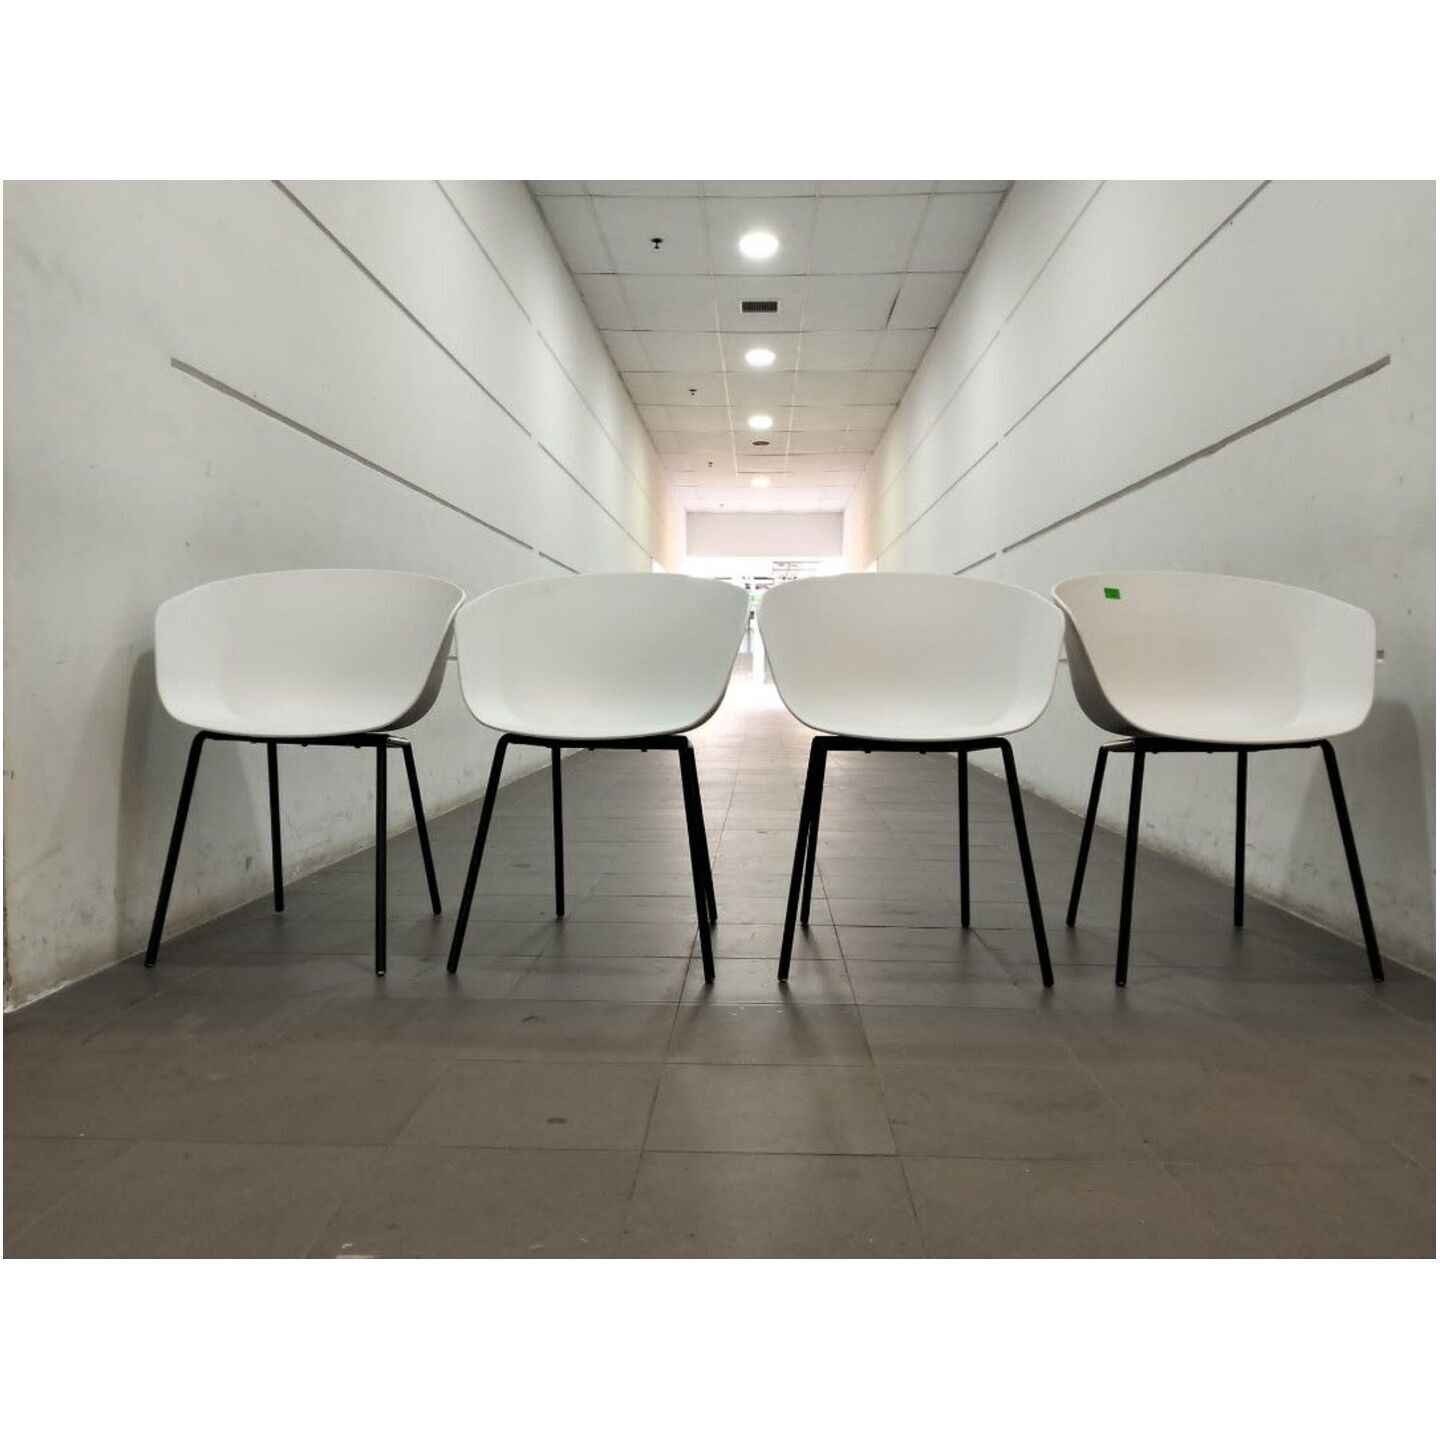 GYRO Armchairs in OFF WHITE (set of 4)